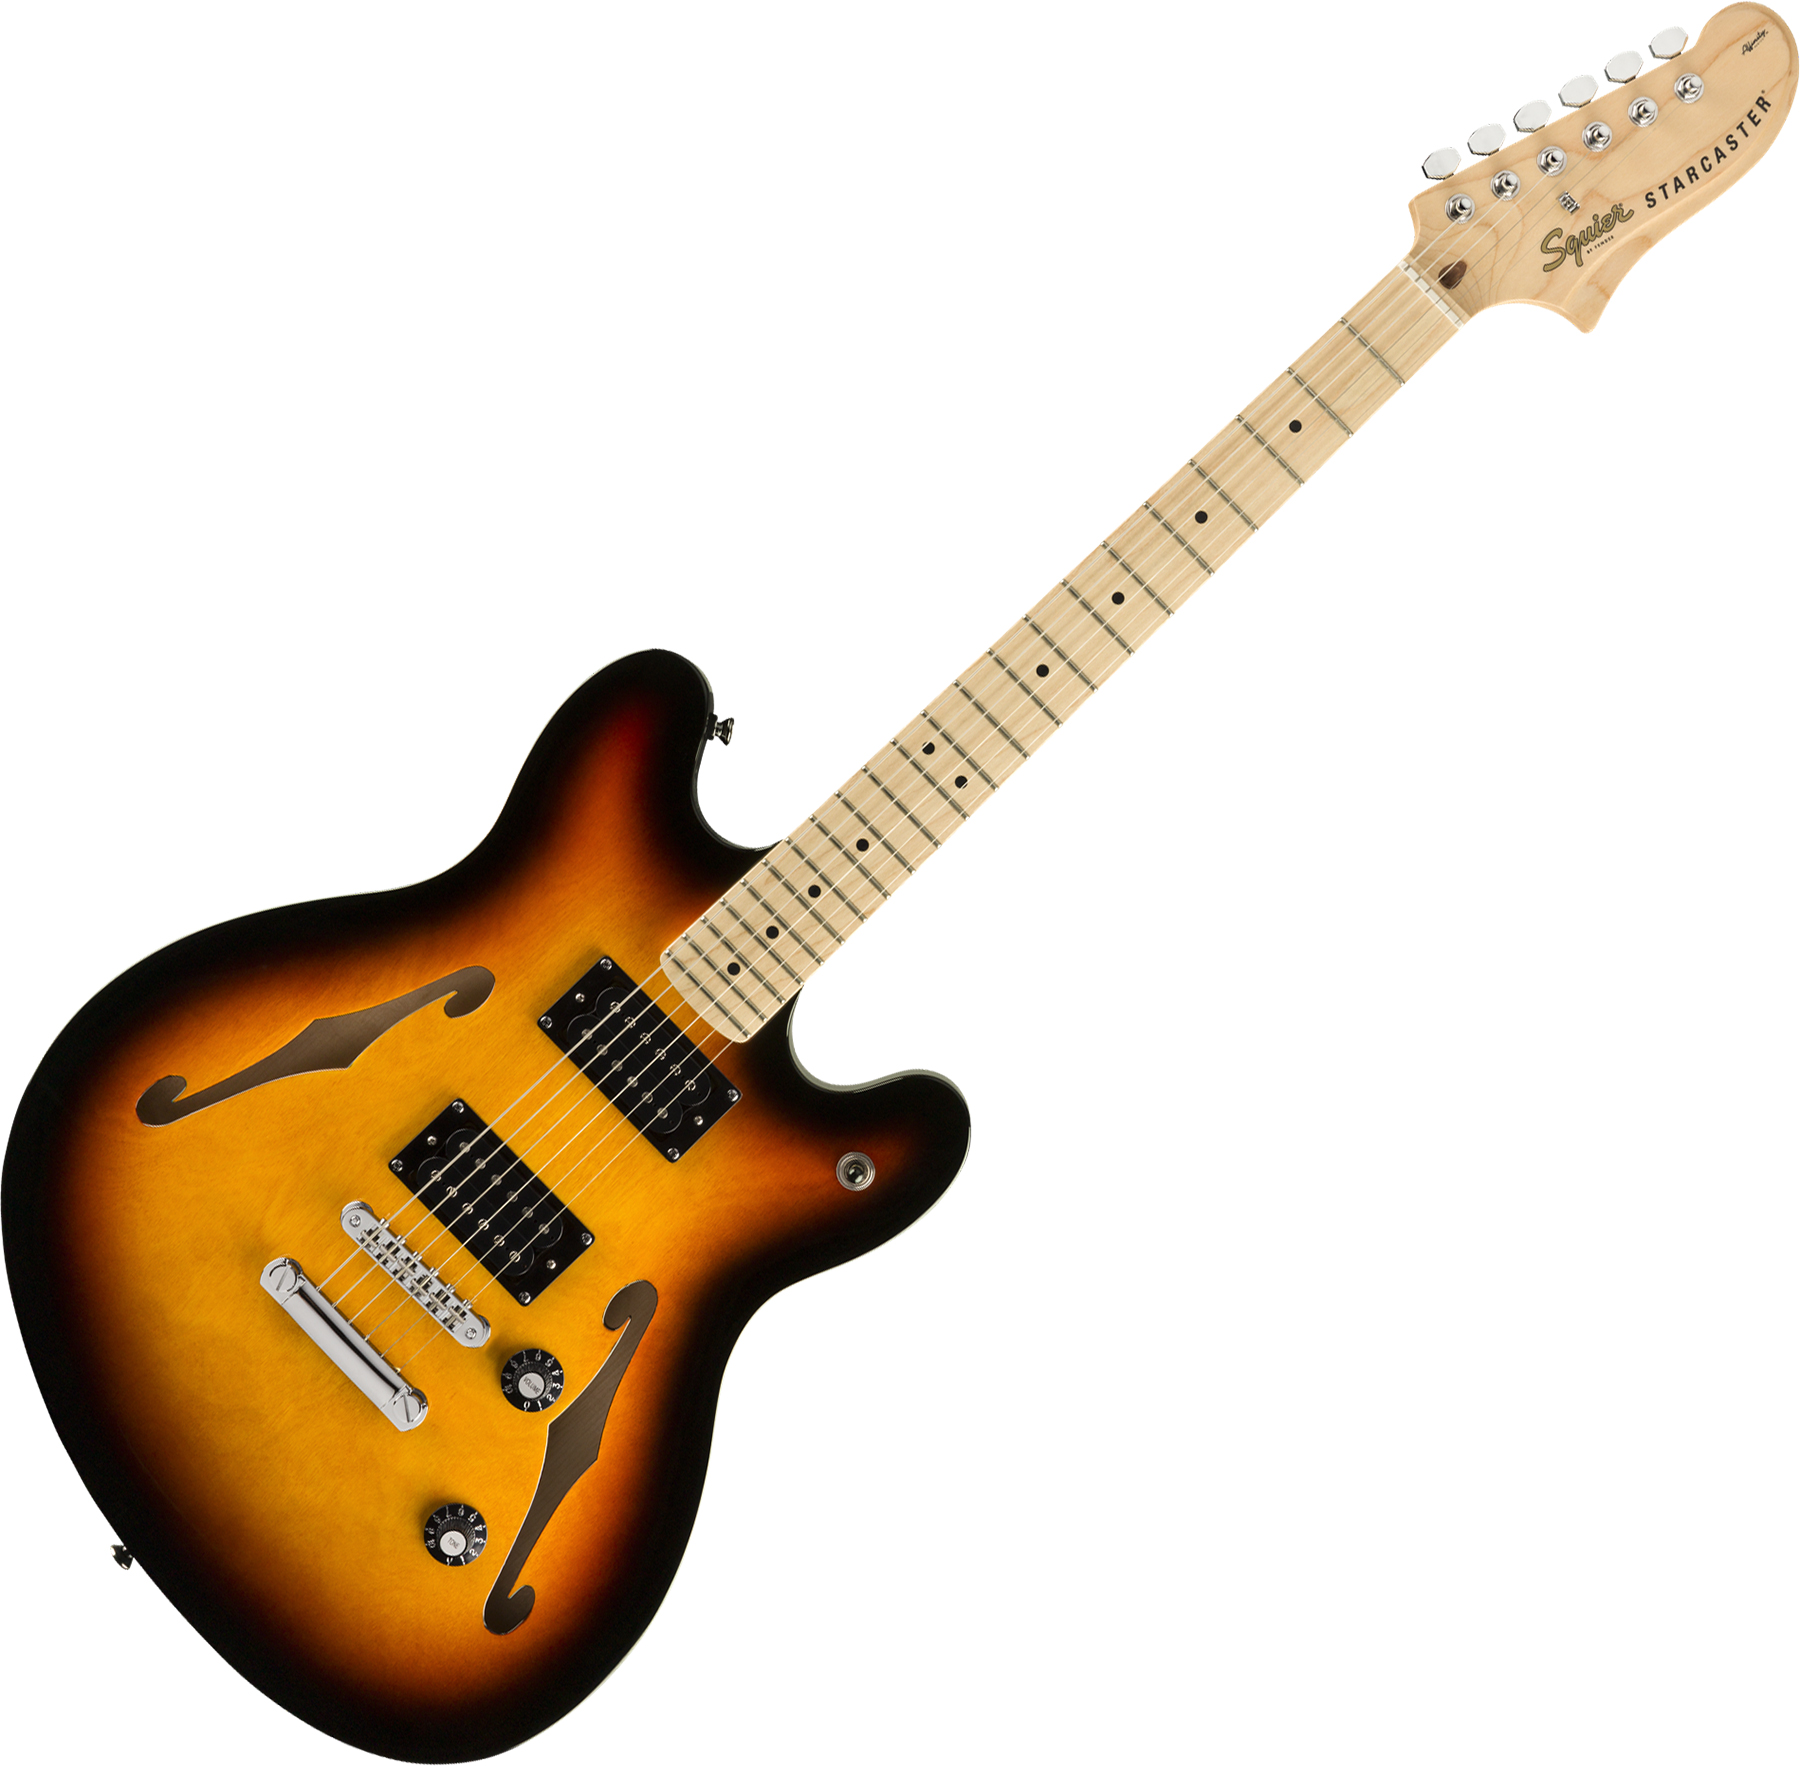 Squier Affinity Series Starcaster - 3-color sunburst Solid body 